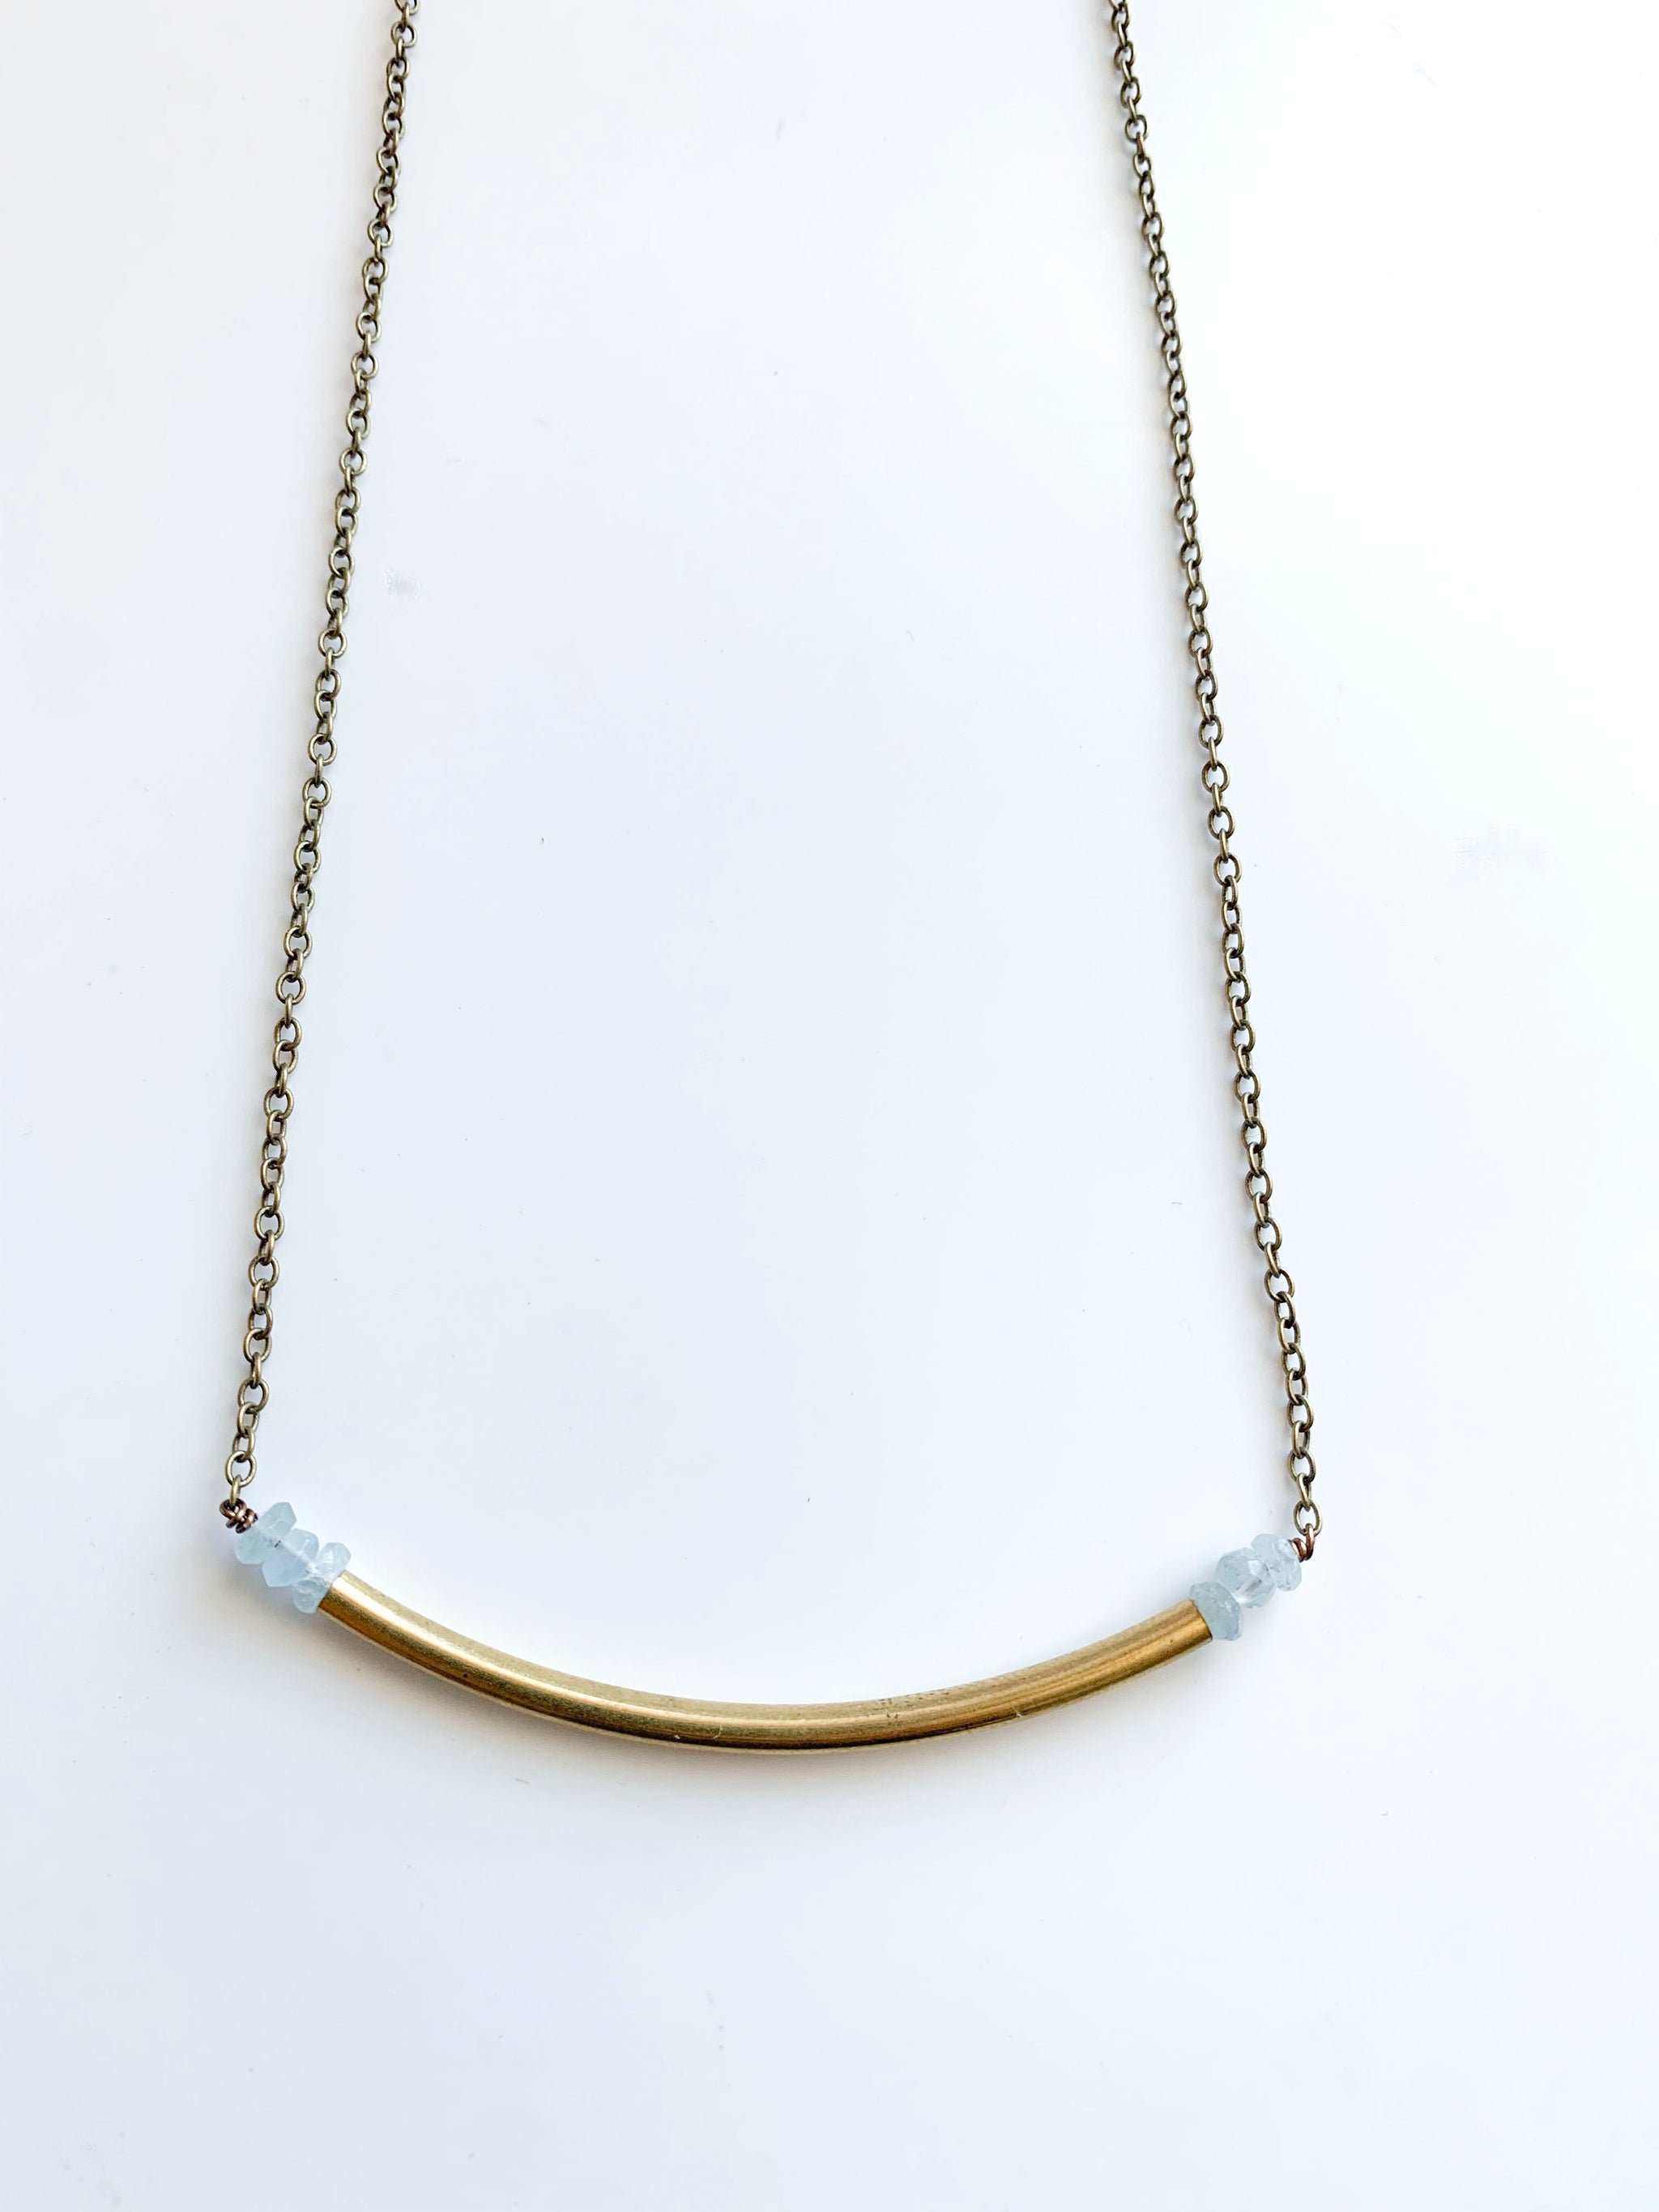 Movement & Sound Beaded Necklace - Grey Theory Mill